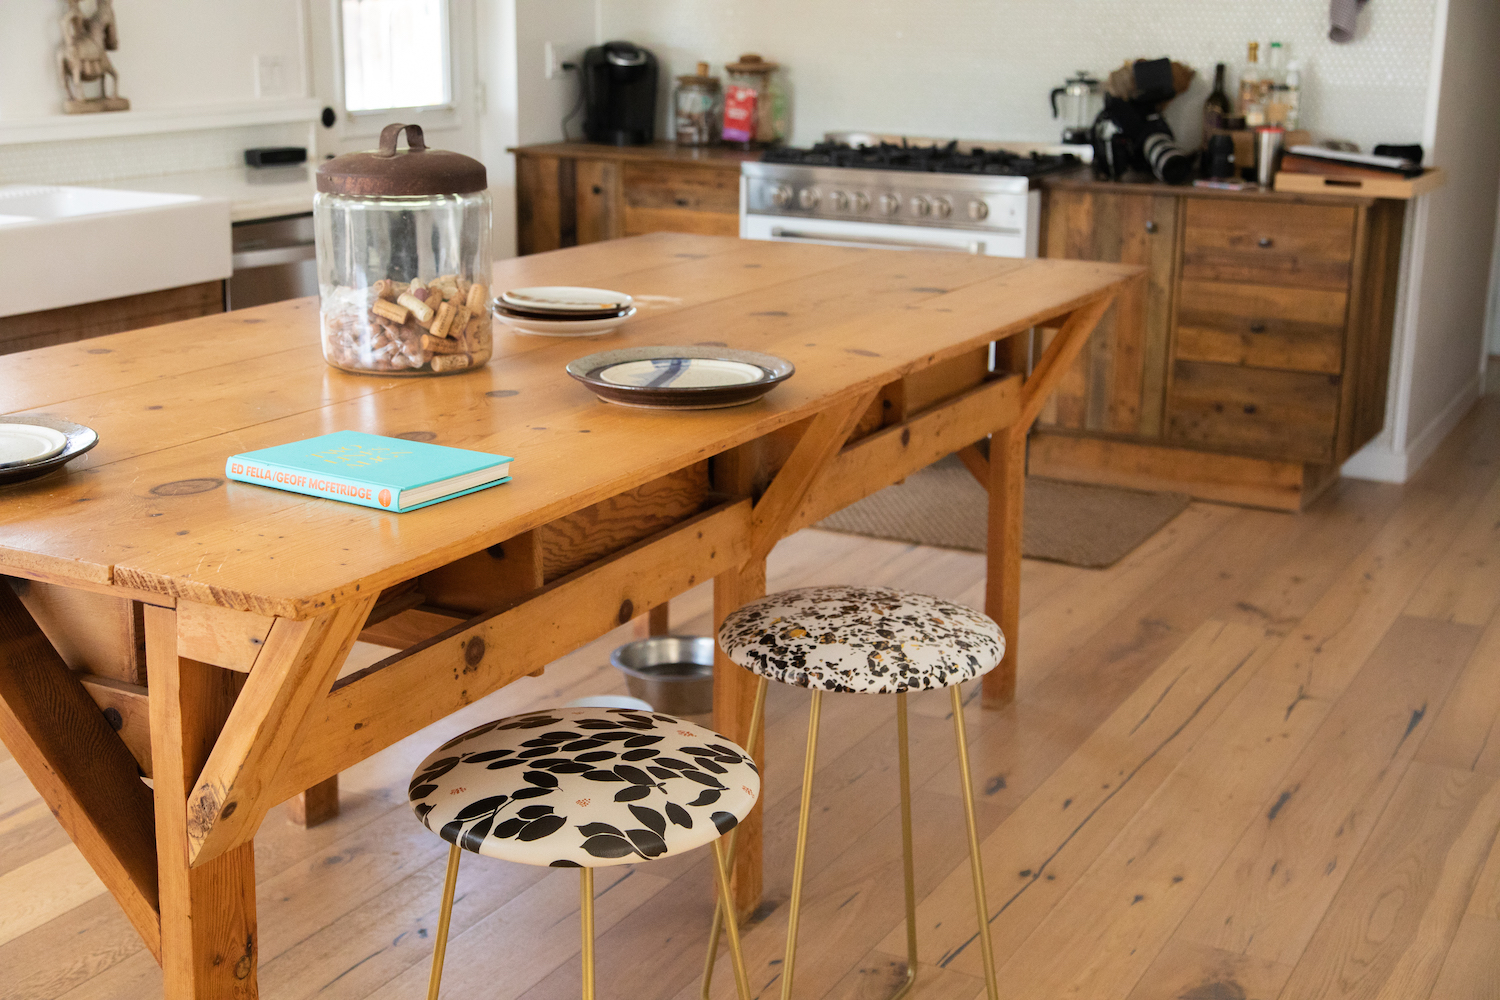 Unusual kitchen stool designs to be used as focal points